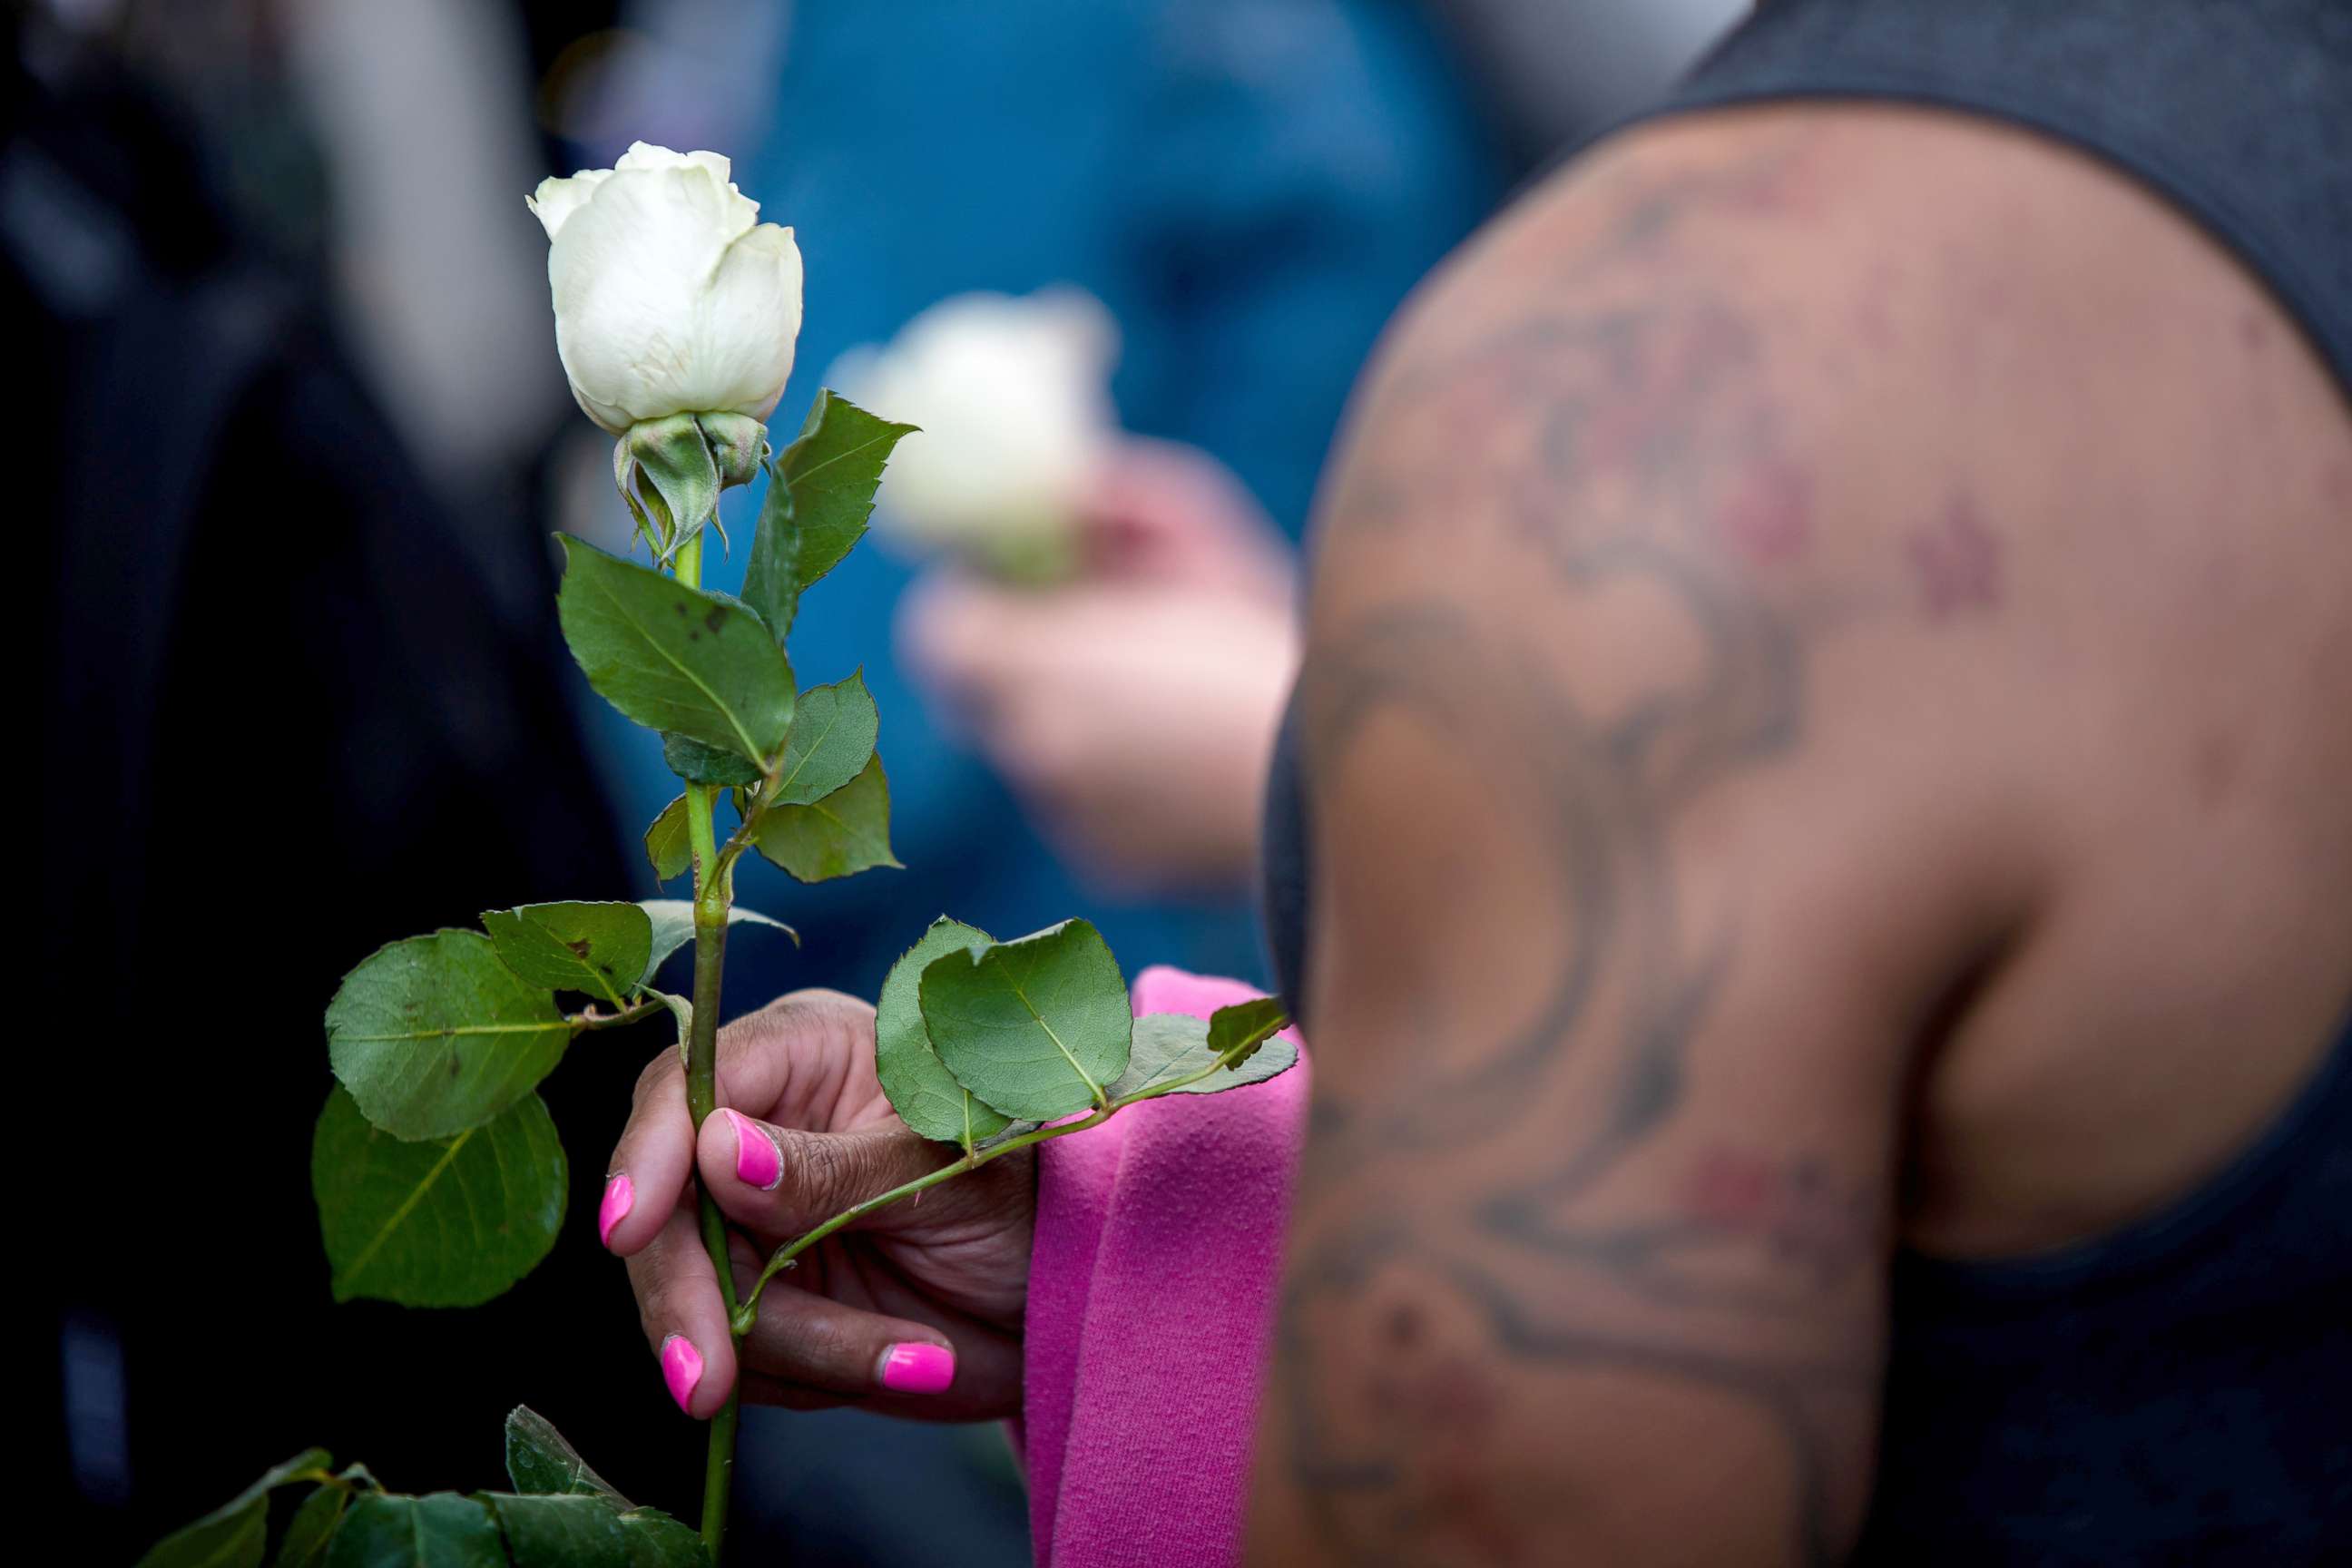 PHOTO: A transgender rights activist holds a white rose while protesting against the recent killings of three transgender women, Muhlaysia Booker, Claire Legato, and Michelle Washington, during a rally at Washington Square Park in New York, May 24, 2019.